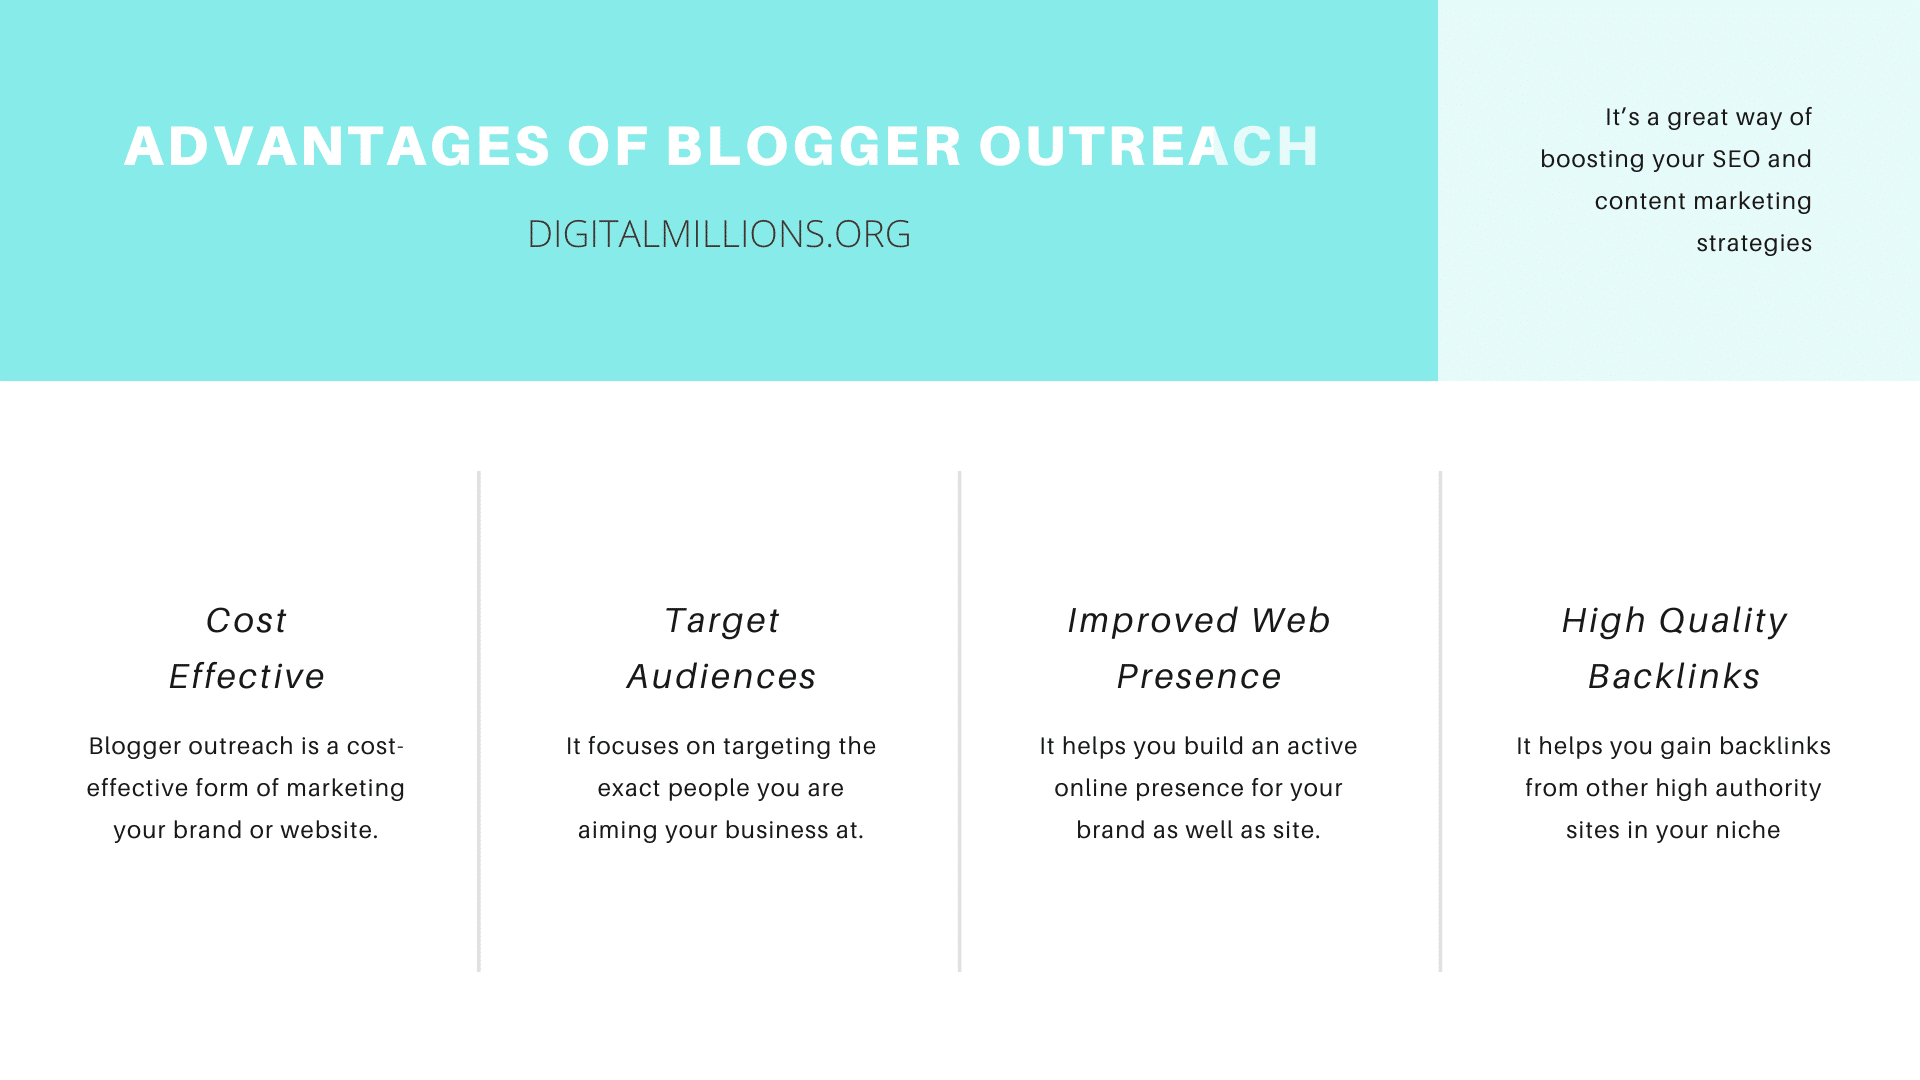 The advantages of blogger outreach